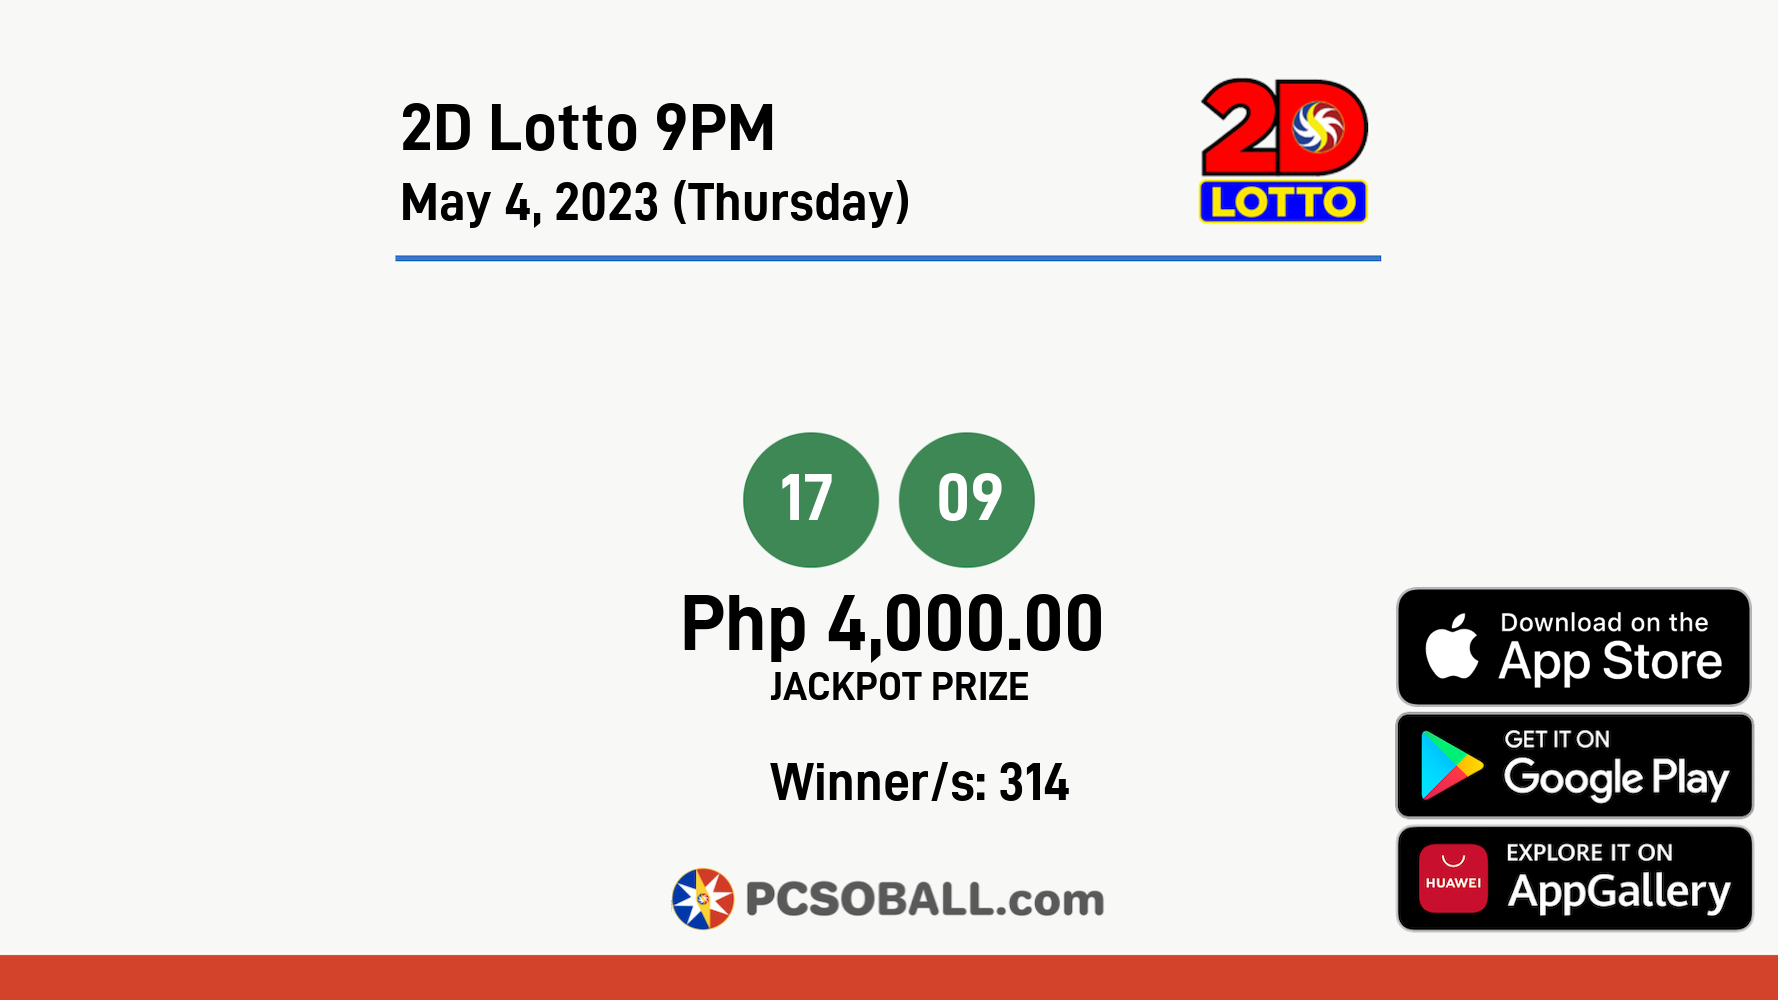 2D Lotto 9PM May 4, 2023 (Thursday) Result